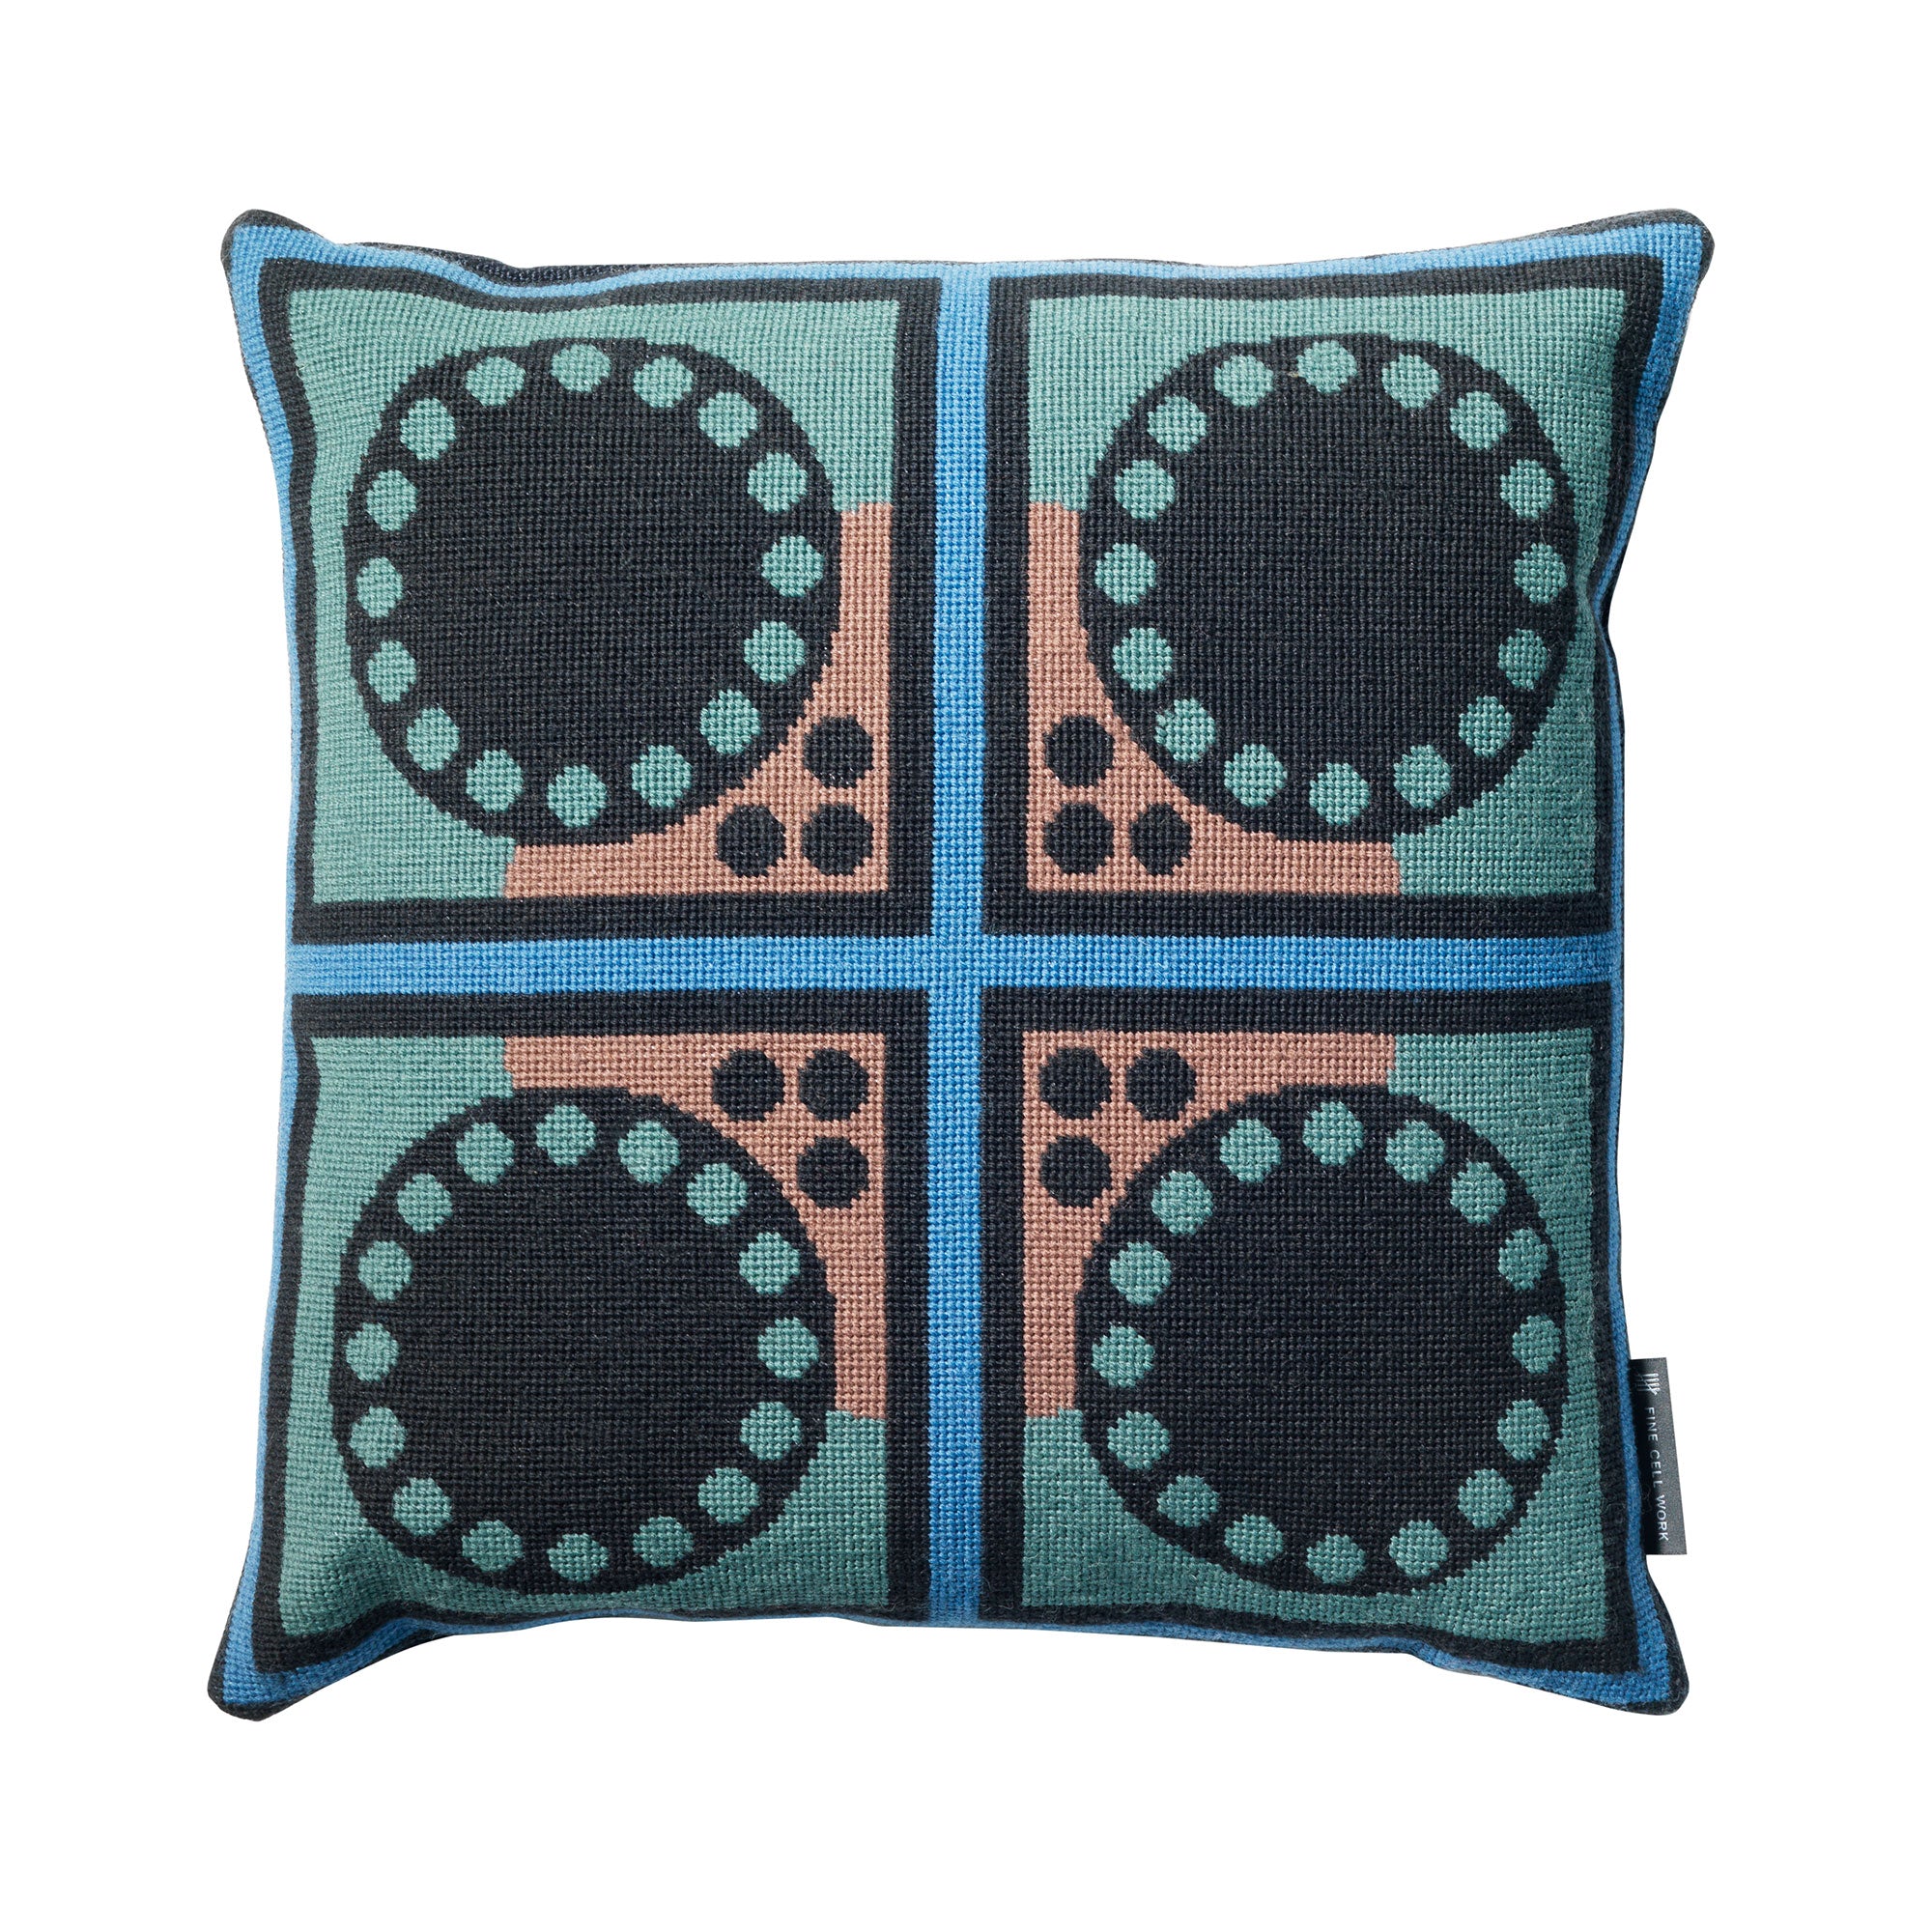 Cressida Bell Granadilla Needlepoint Cushion Blue and Green featured George Clarke Old House New Home